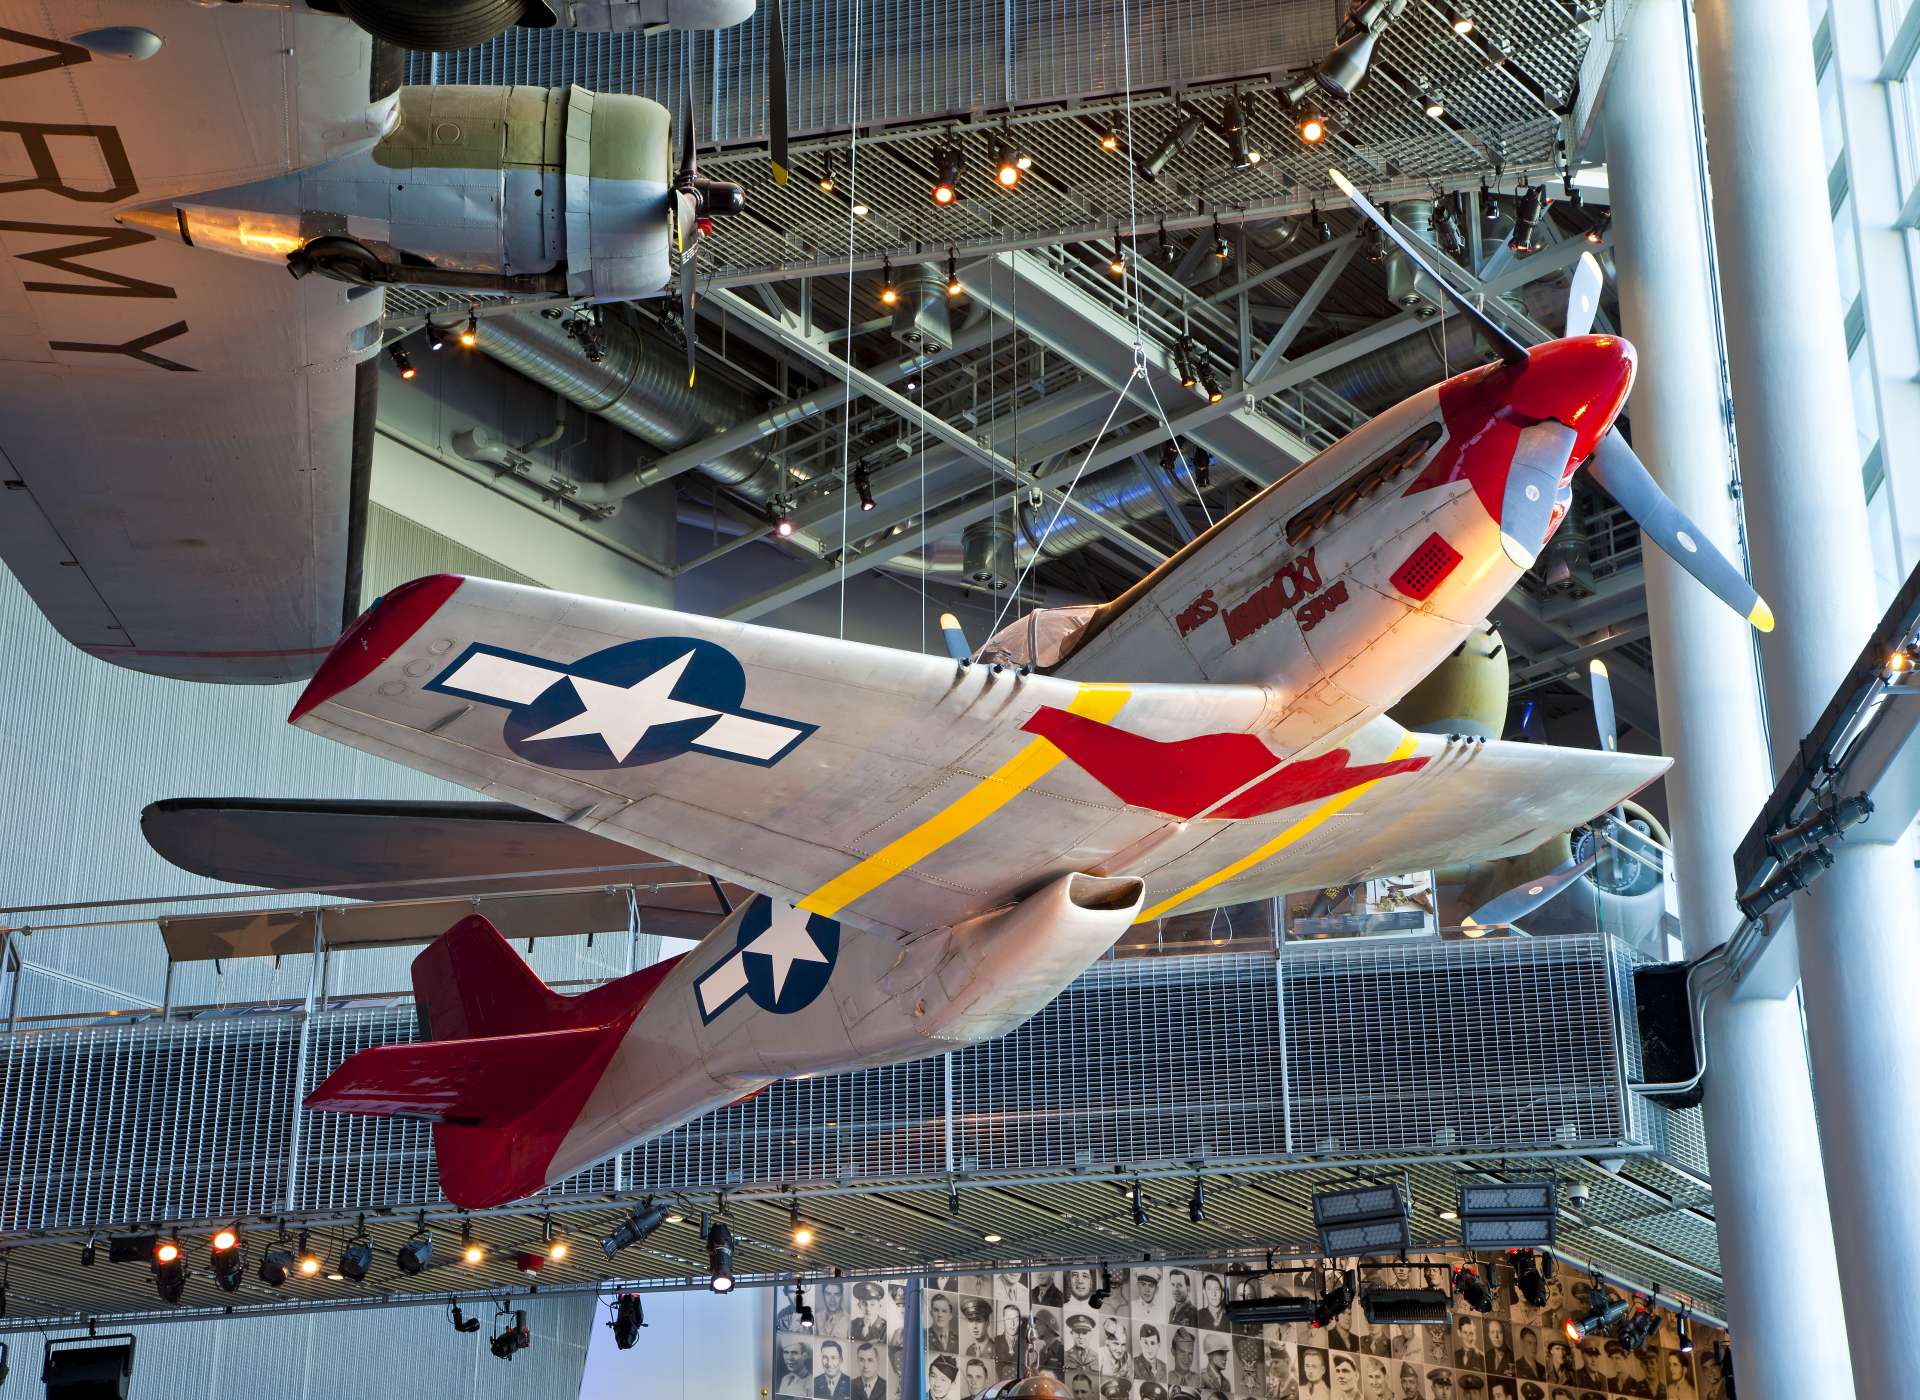 P-51 Red Tail aircraft in US Freedom Pavilion